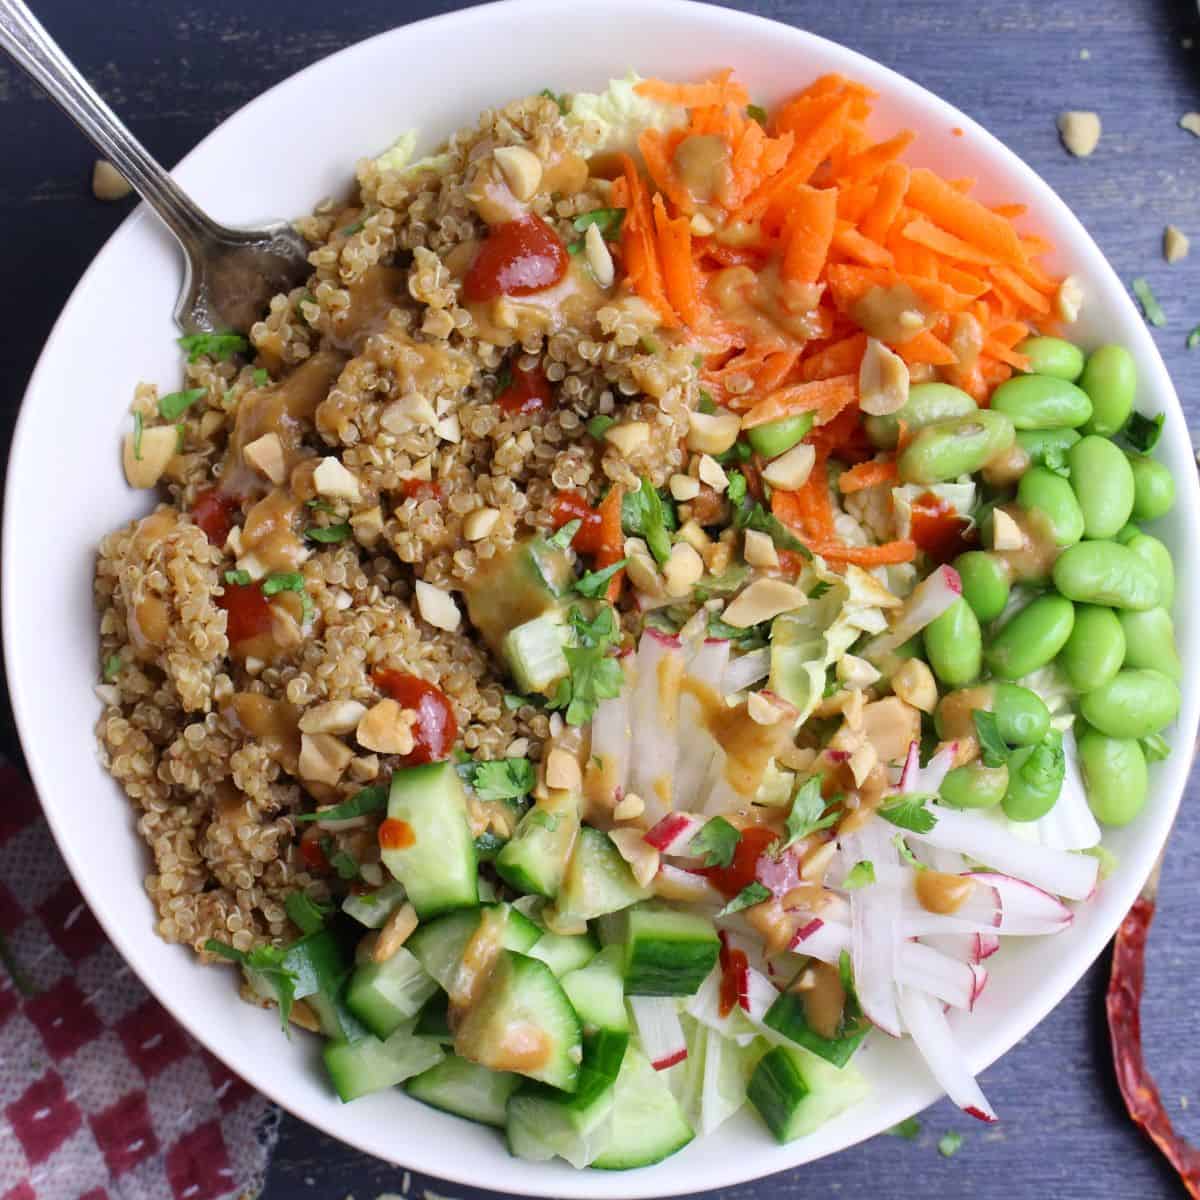 Featured image for “Vibrant And Crunchy Thai Nourish Bowl with Peanut Dressing”